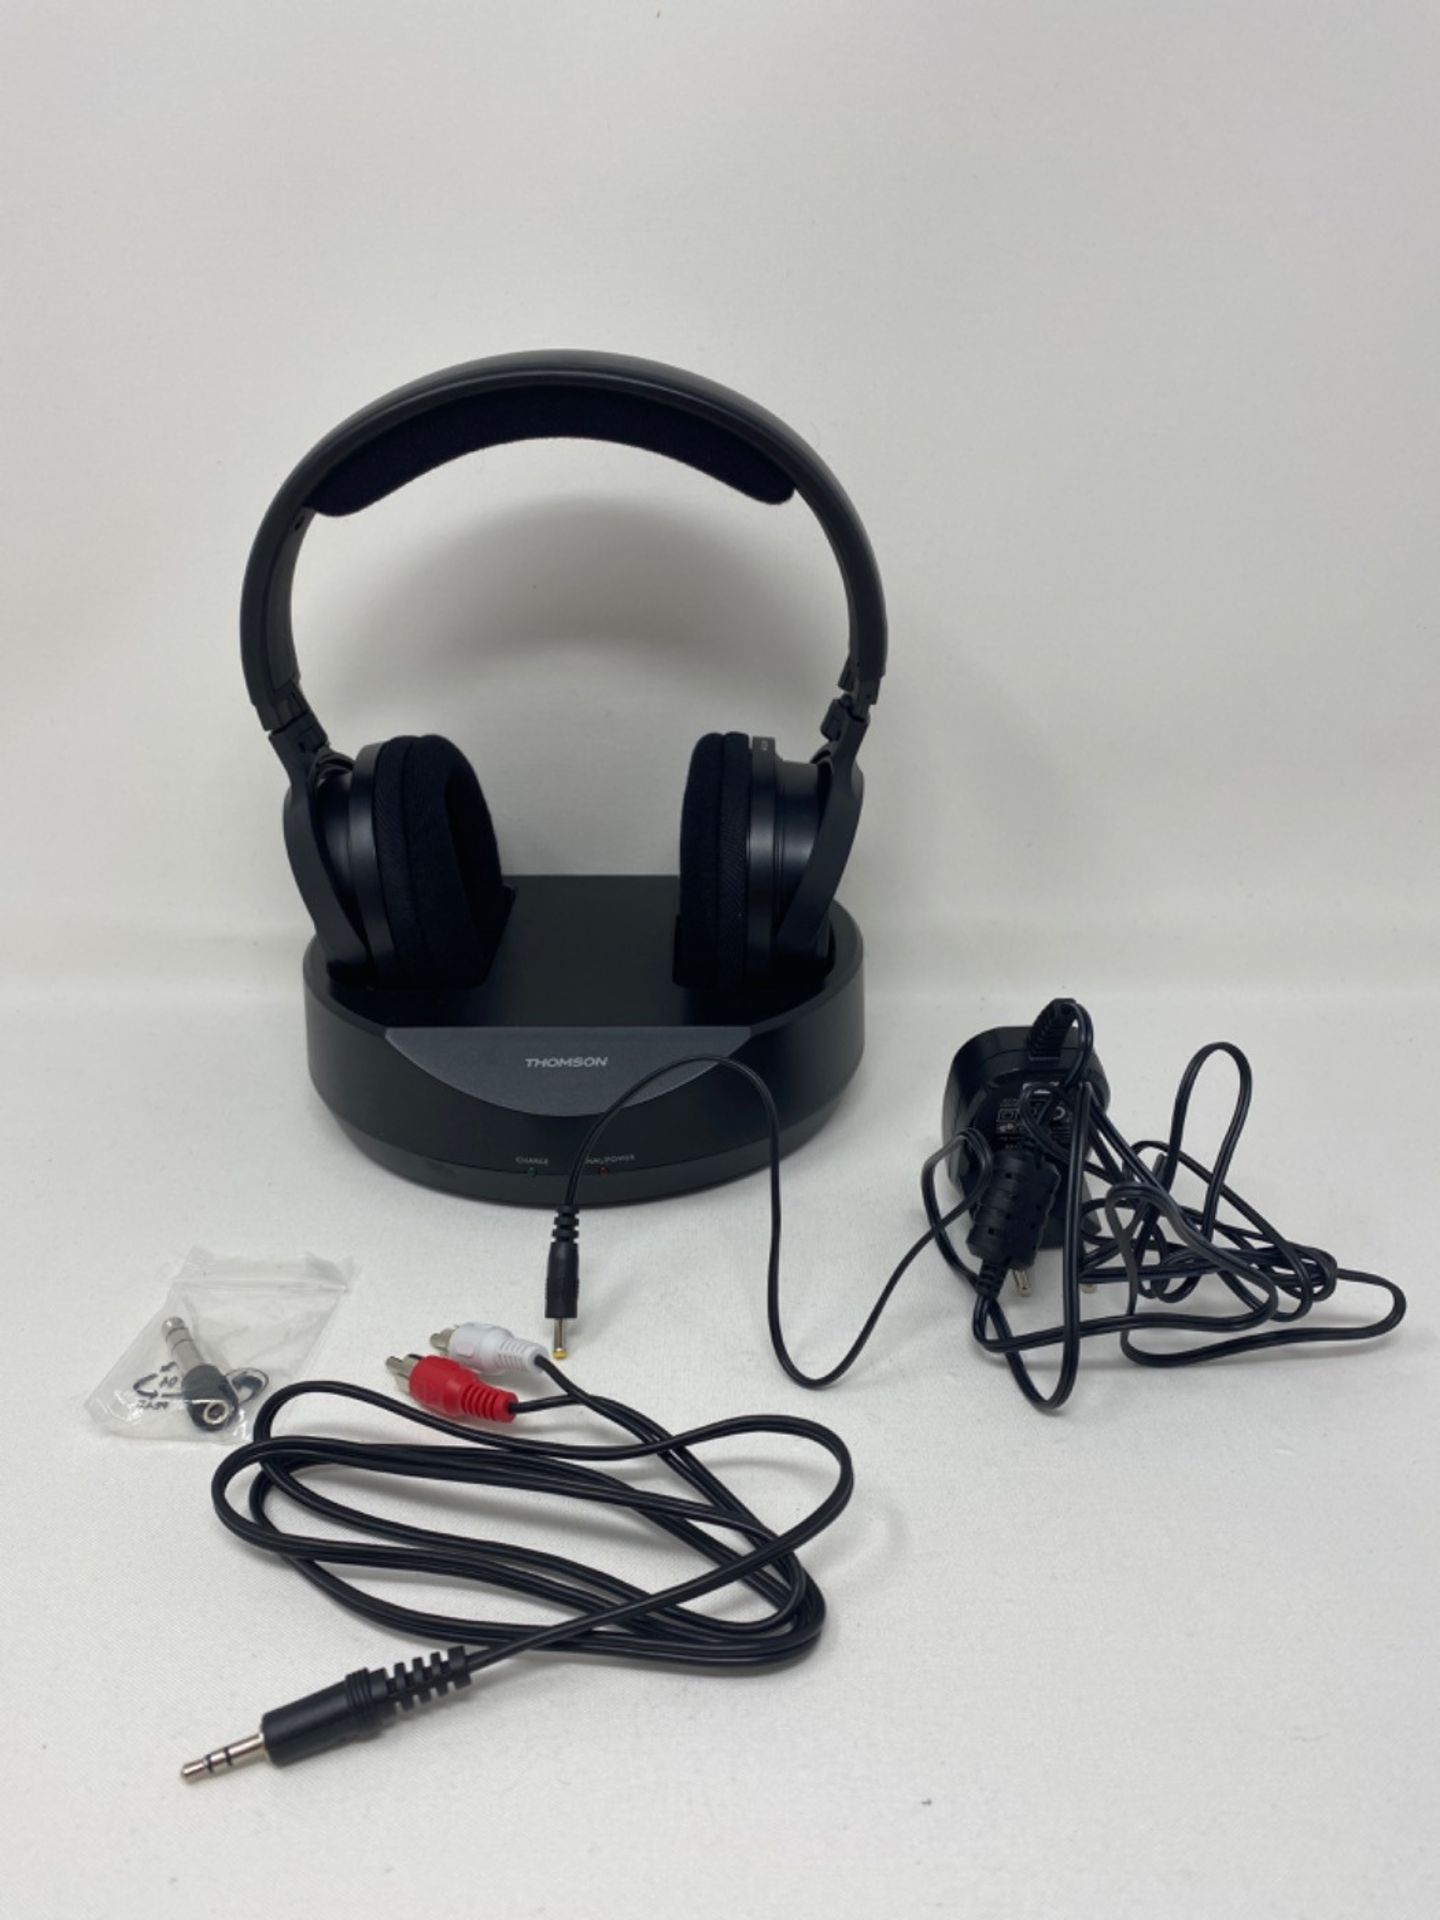 Thomson wireless headphones with charging station (over-ear headphones for TV/TV, wire - Image 3 of 3